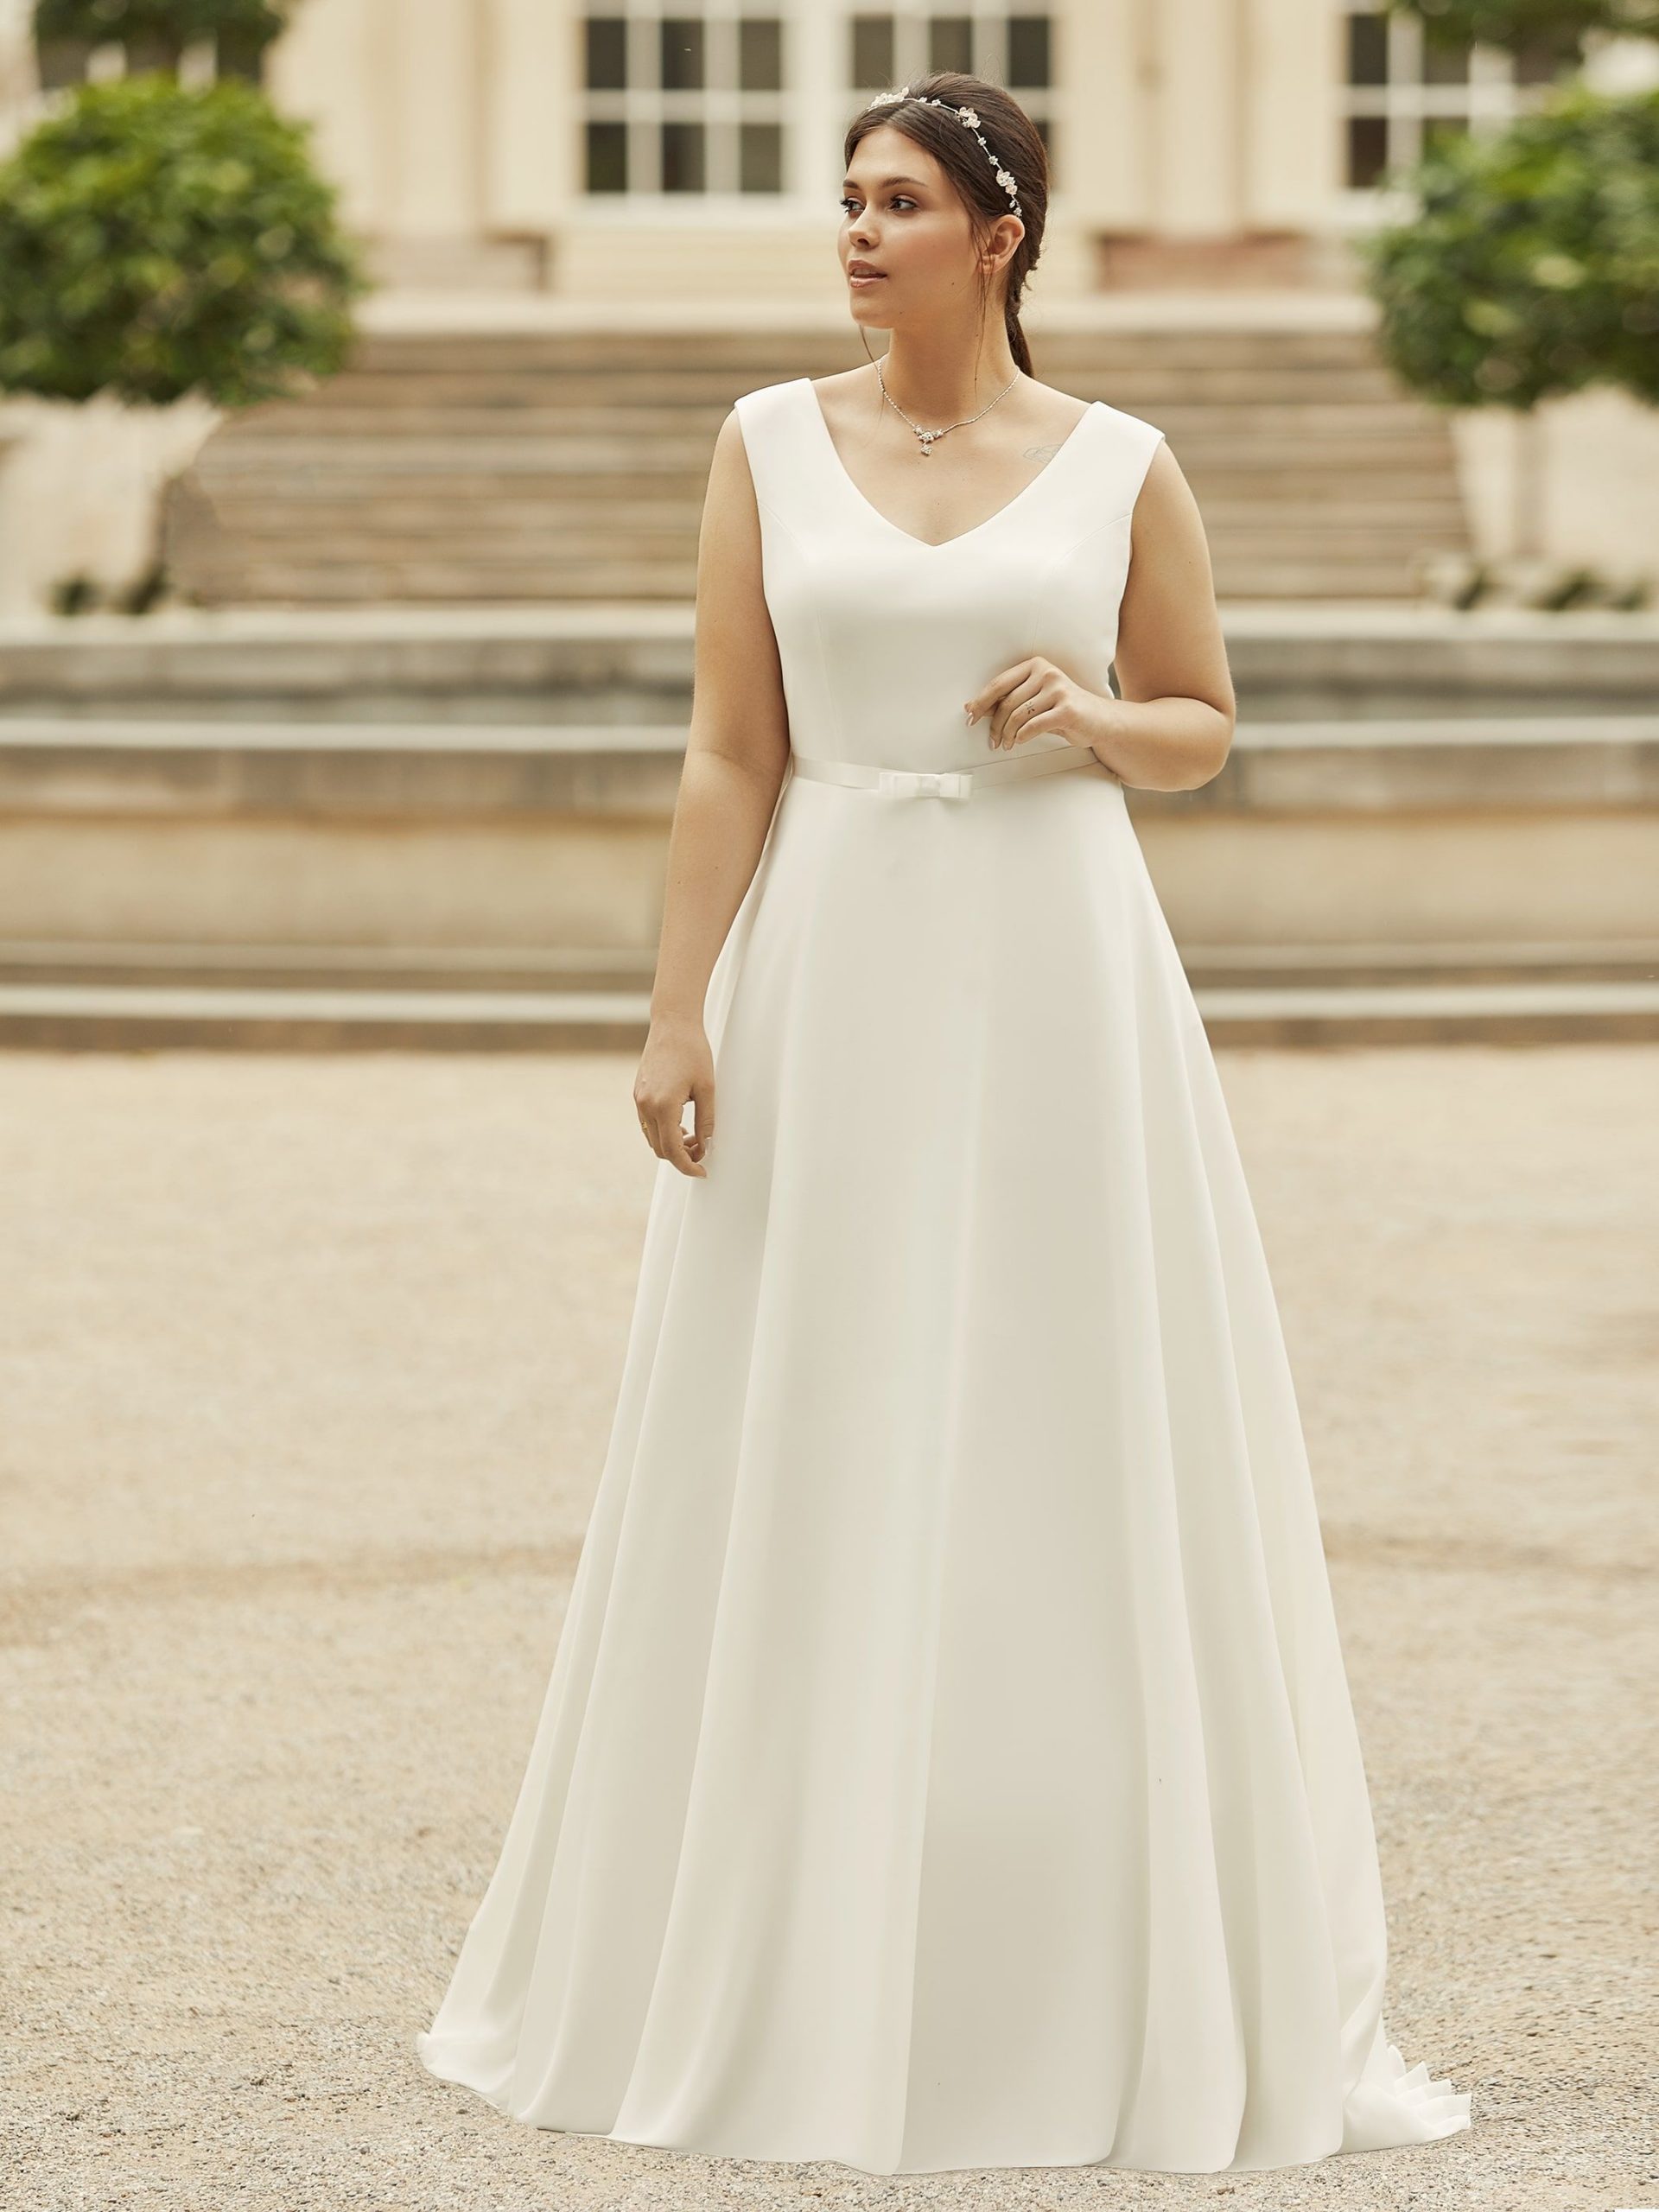 Photo shows a bride wearing a plain ivory chiffon wedding dress by Bianco Evento. Dalila features a v-neckline, wide shoulder straps, and plain A-line skirt.